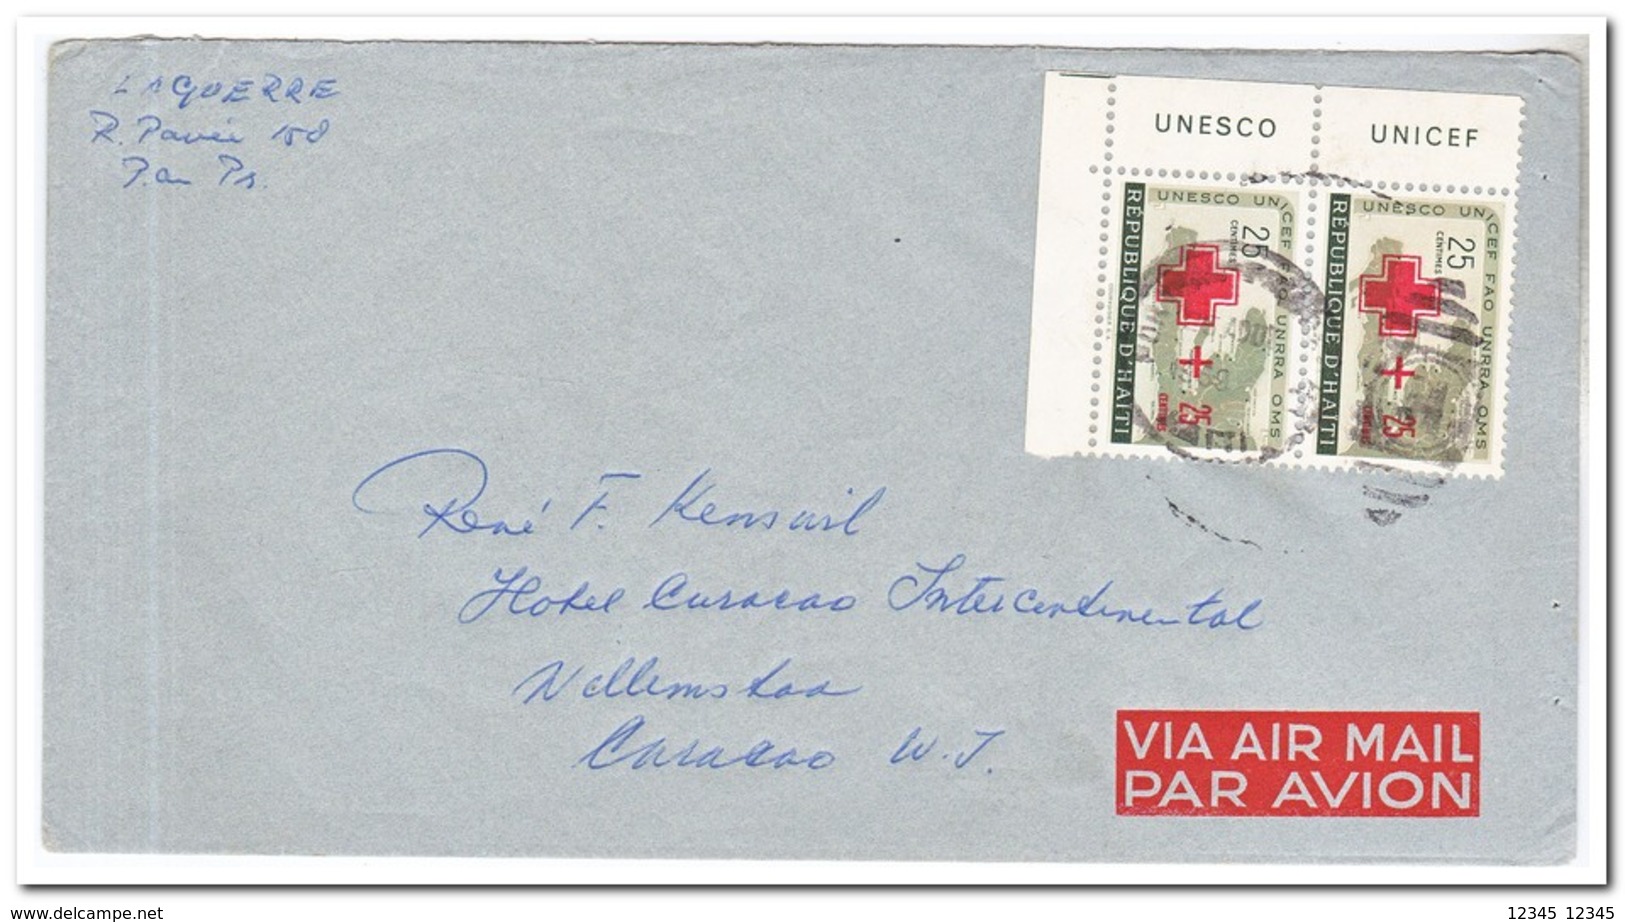 Haïti, 12 letters with red cross stamps